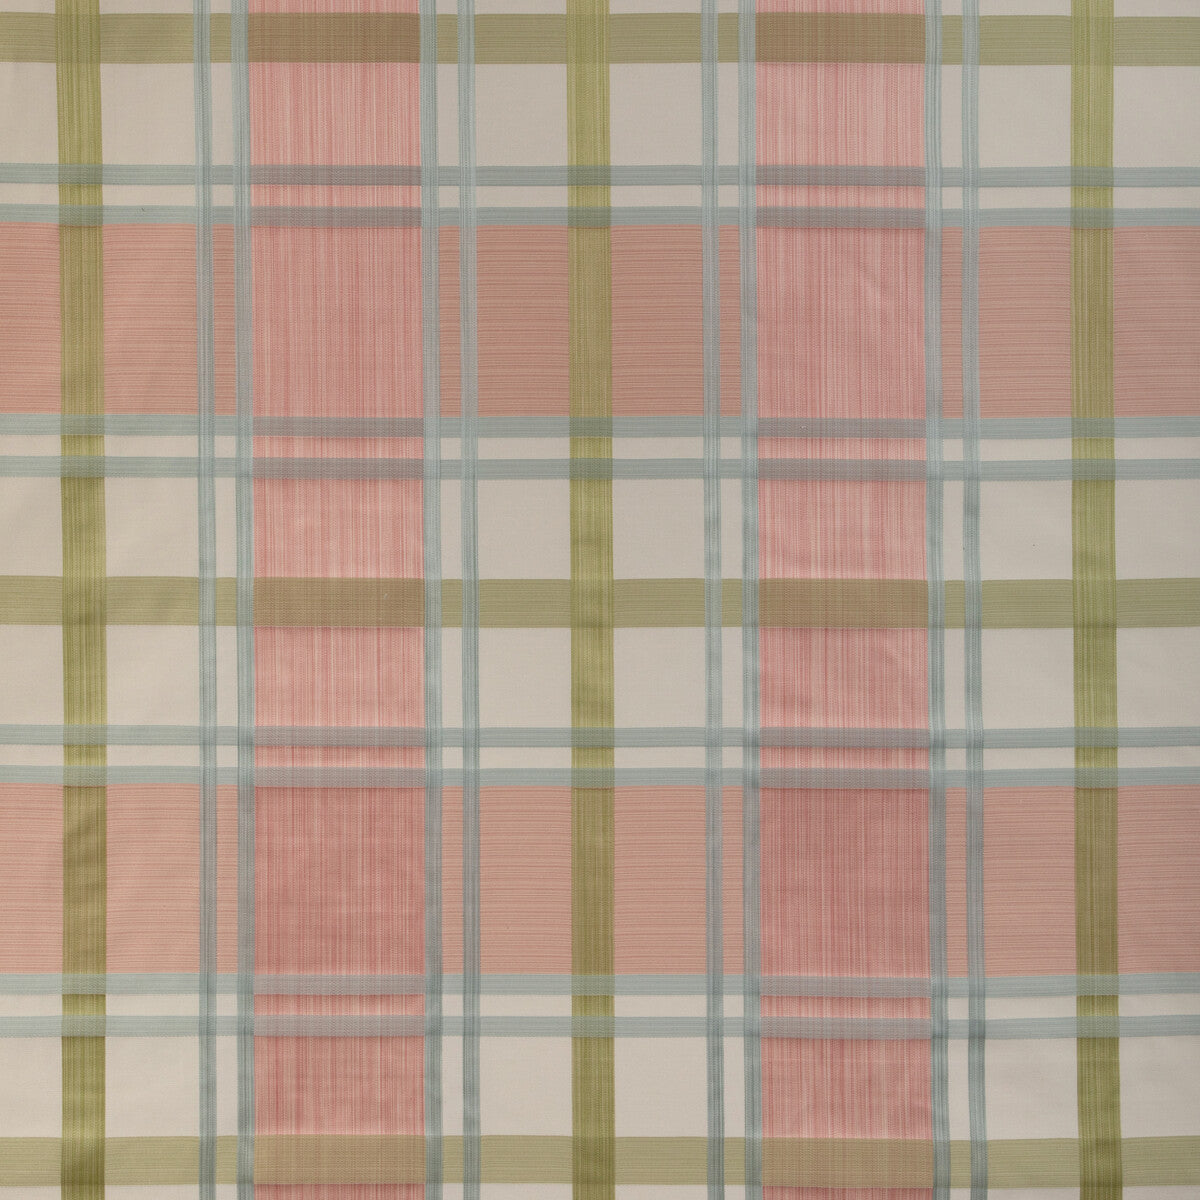 Davies Plaid fabric in petal/kiwi color - pattern 2023109.73.0 - by Lee Jofa in the Highfield Stripes And Plaids collection